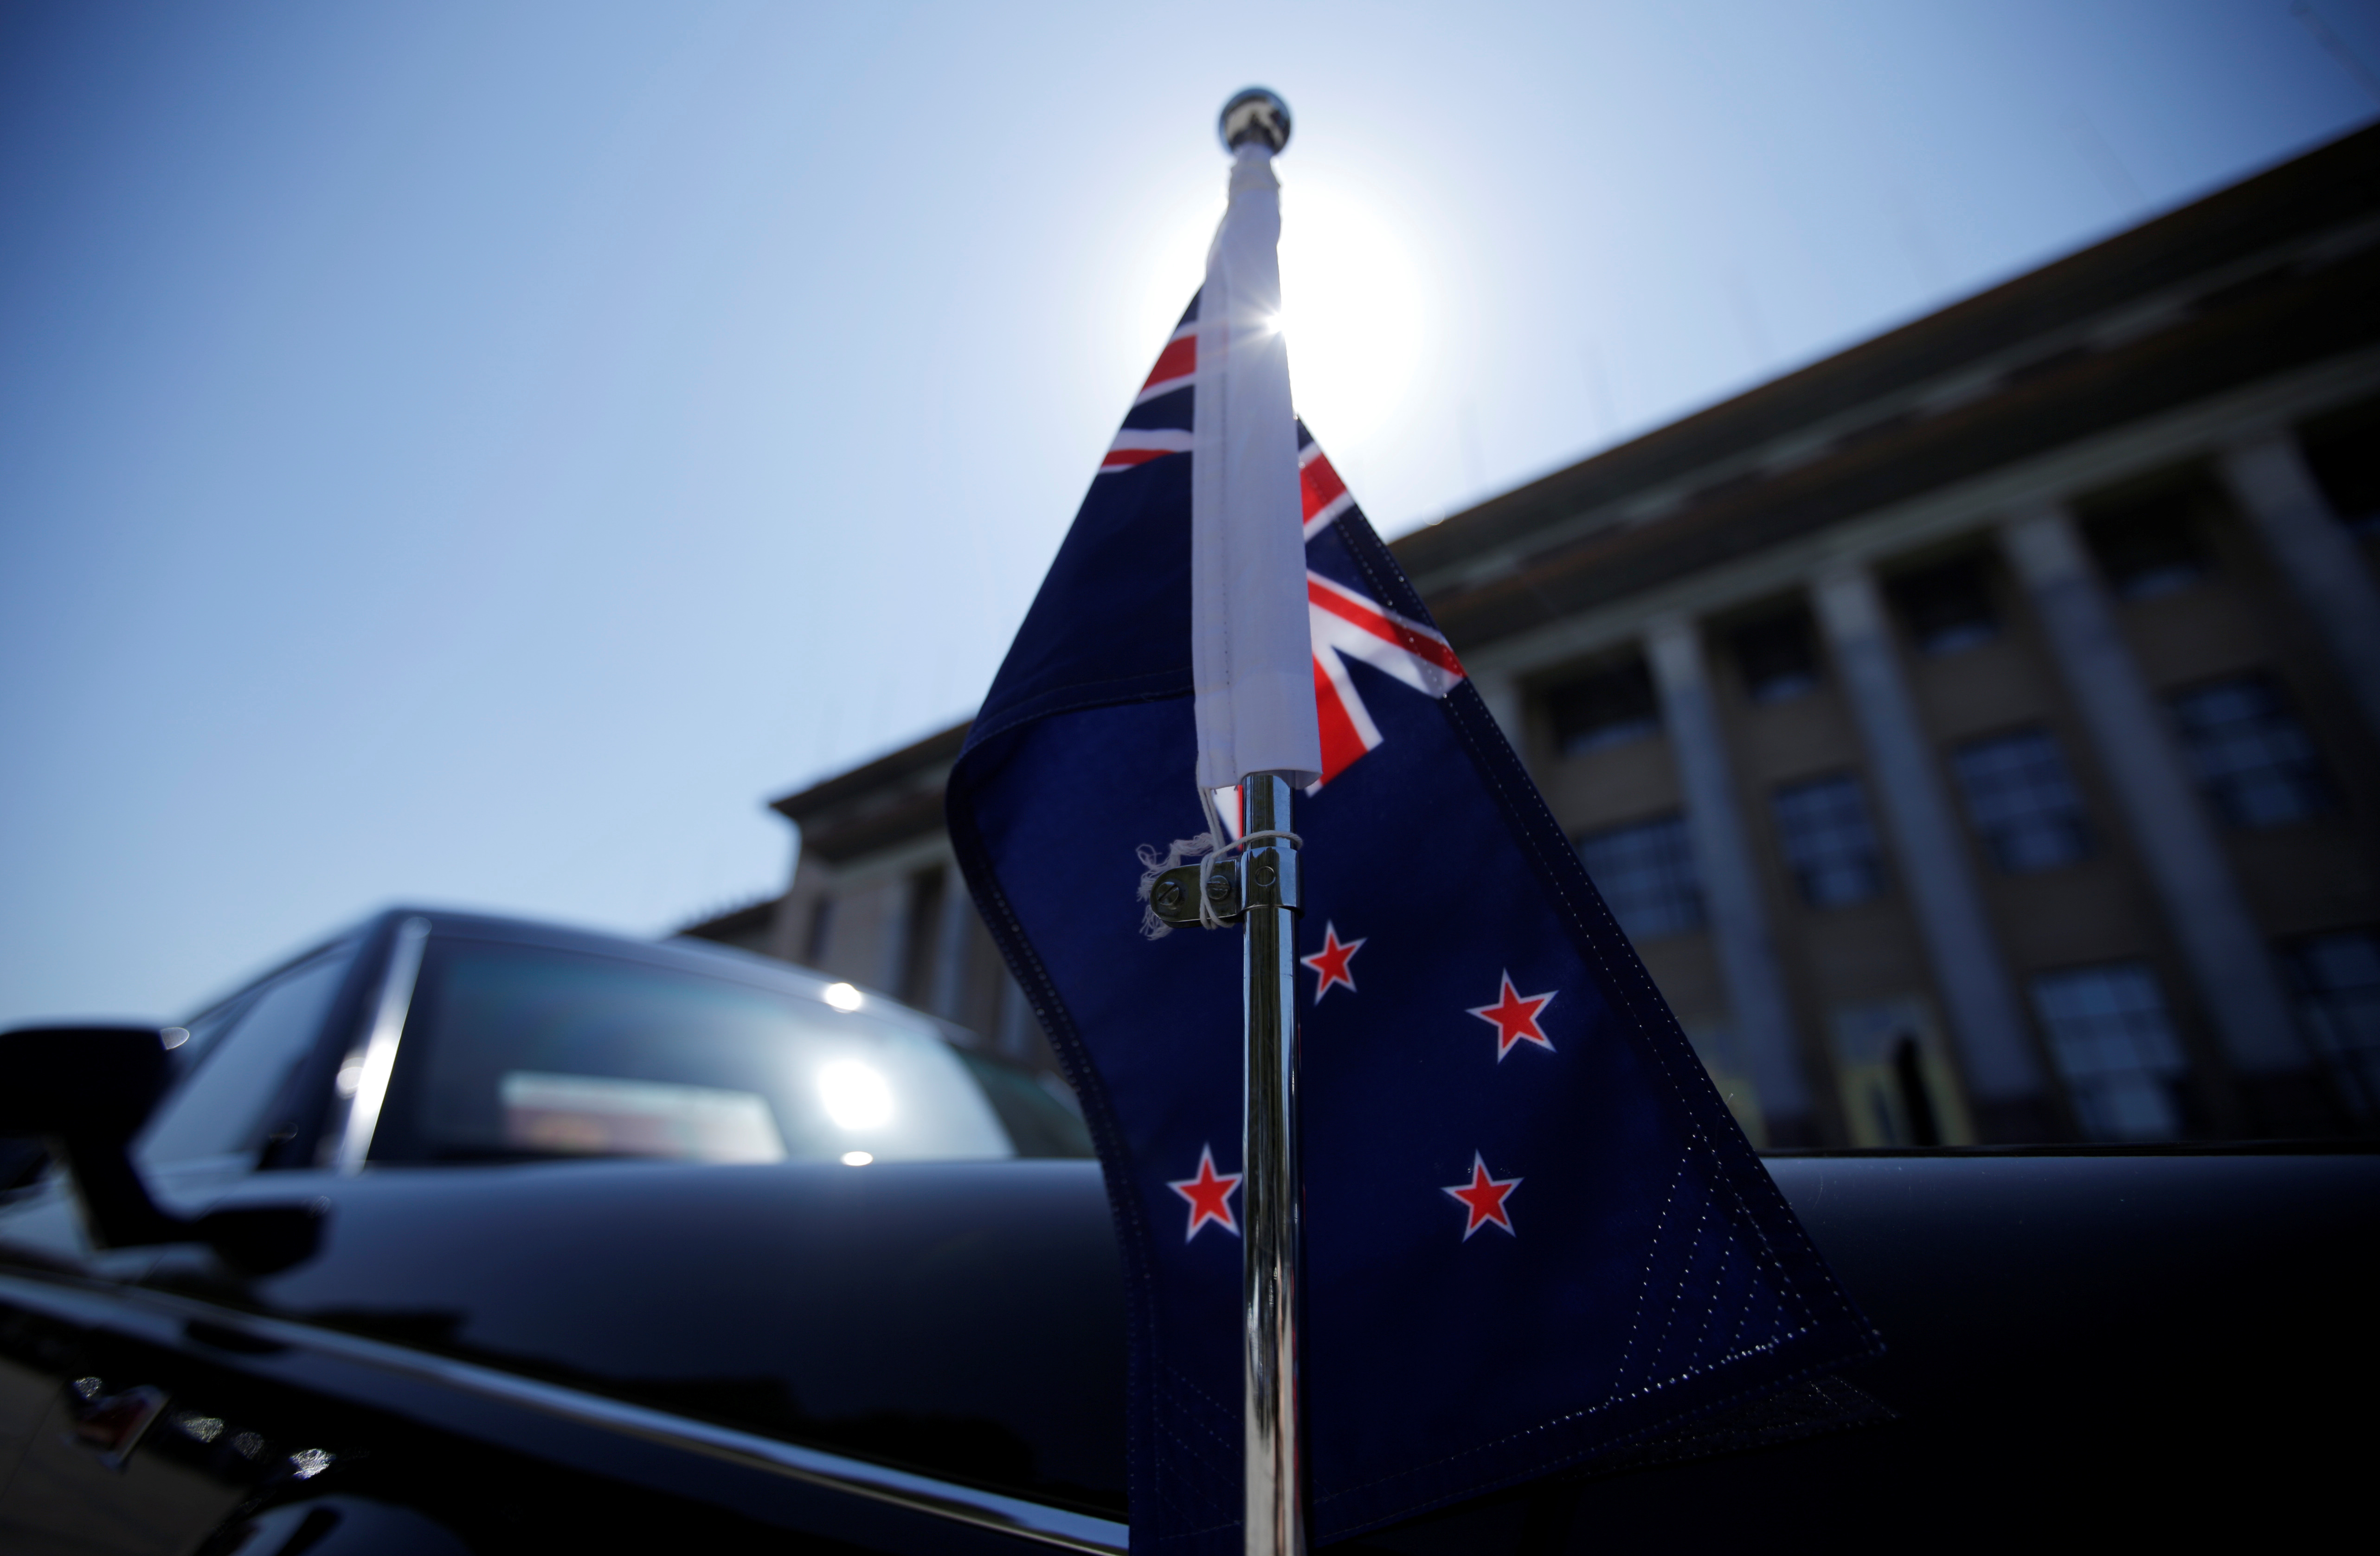 A car with a New Zealand flag waits for New Zealand Prime Minister Jacinda Ardern in Beijing